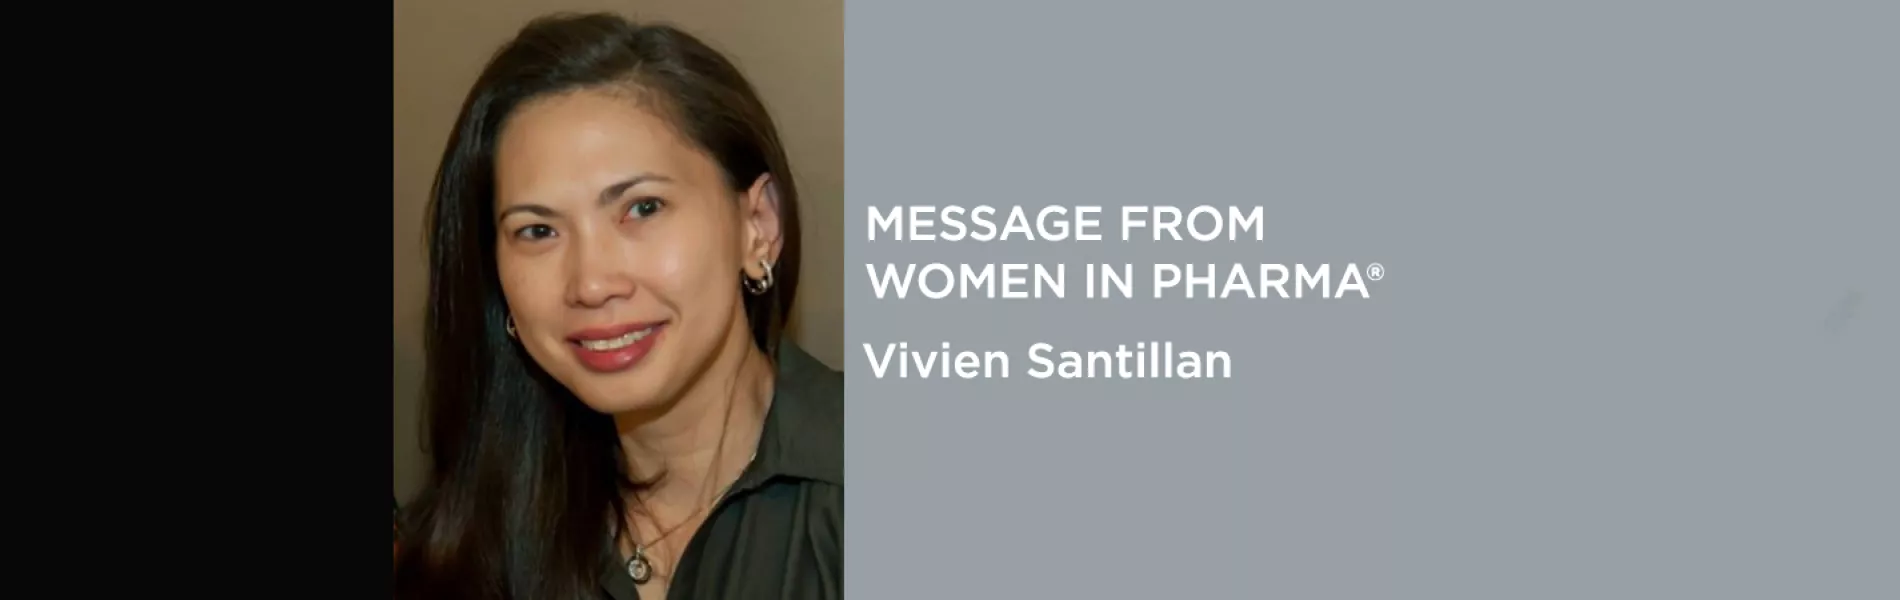 Women in Pharma® Editorial: Adapting Technology & Culture to Emerging Technologies